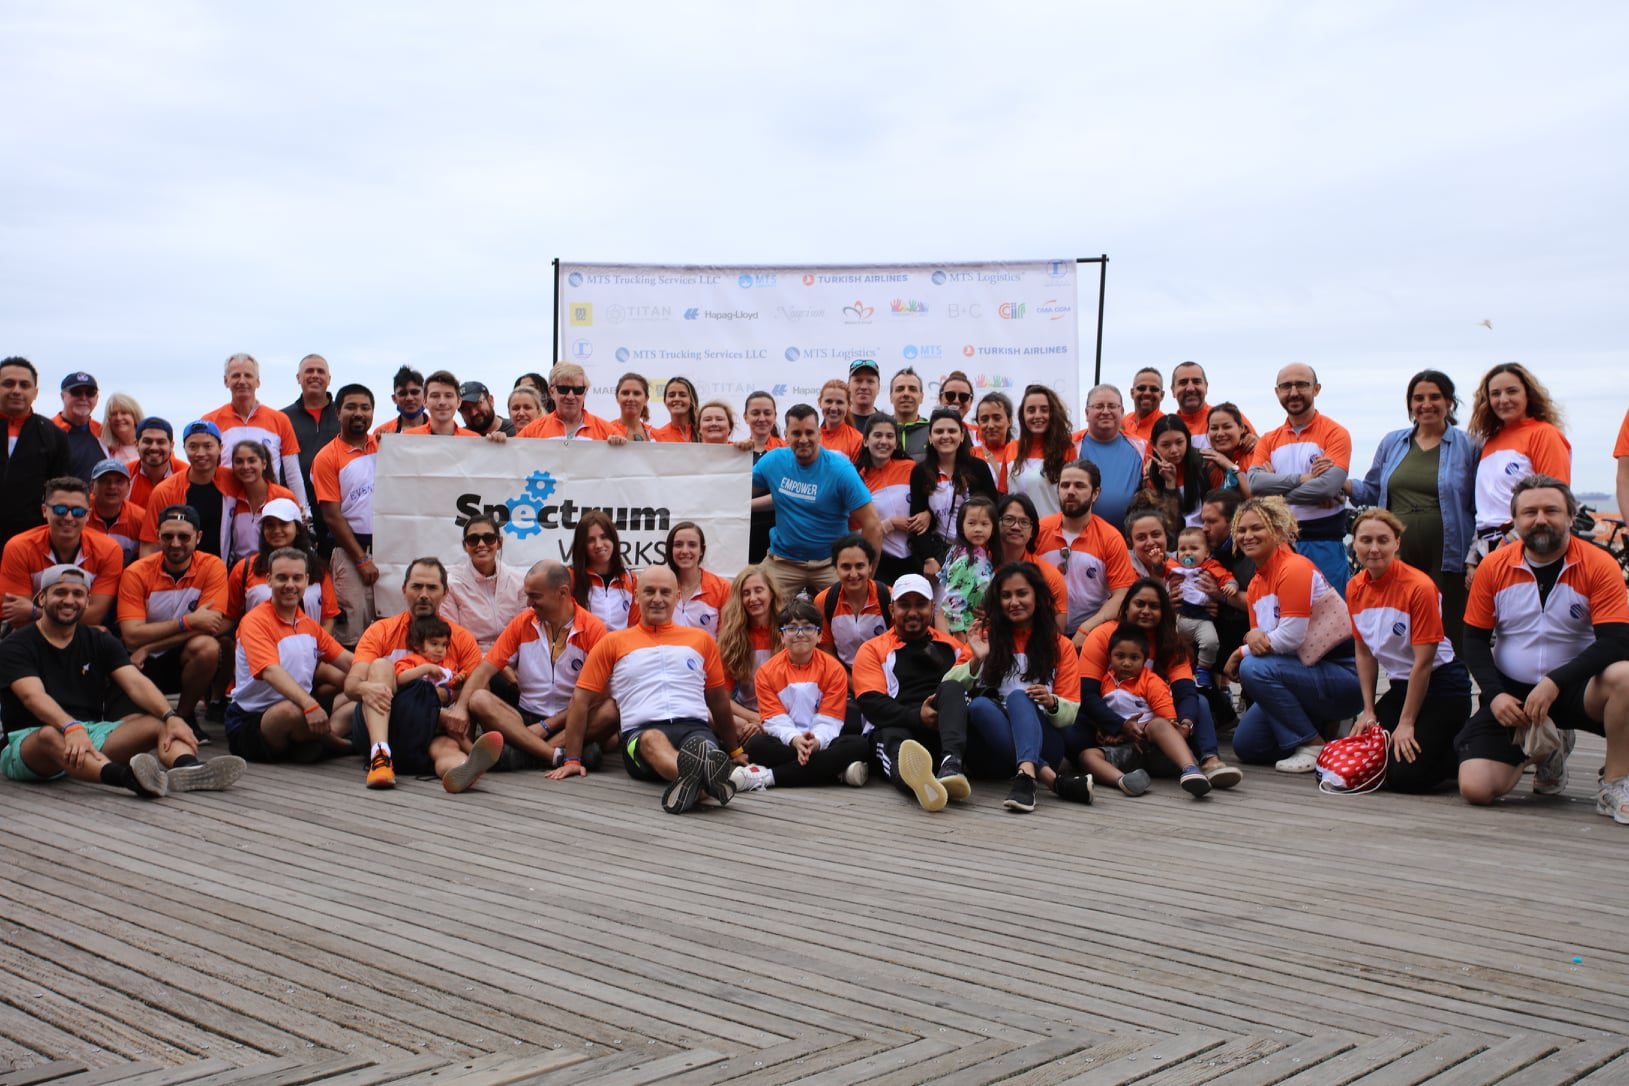 NYC Based Shipping Company MTS Logistics Raises Over $80,000 for Autism Awareness, Giving Back through Its 12th Annual Bike Tour